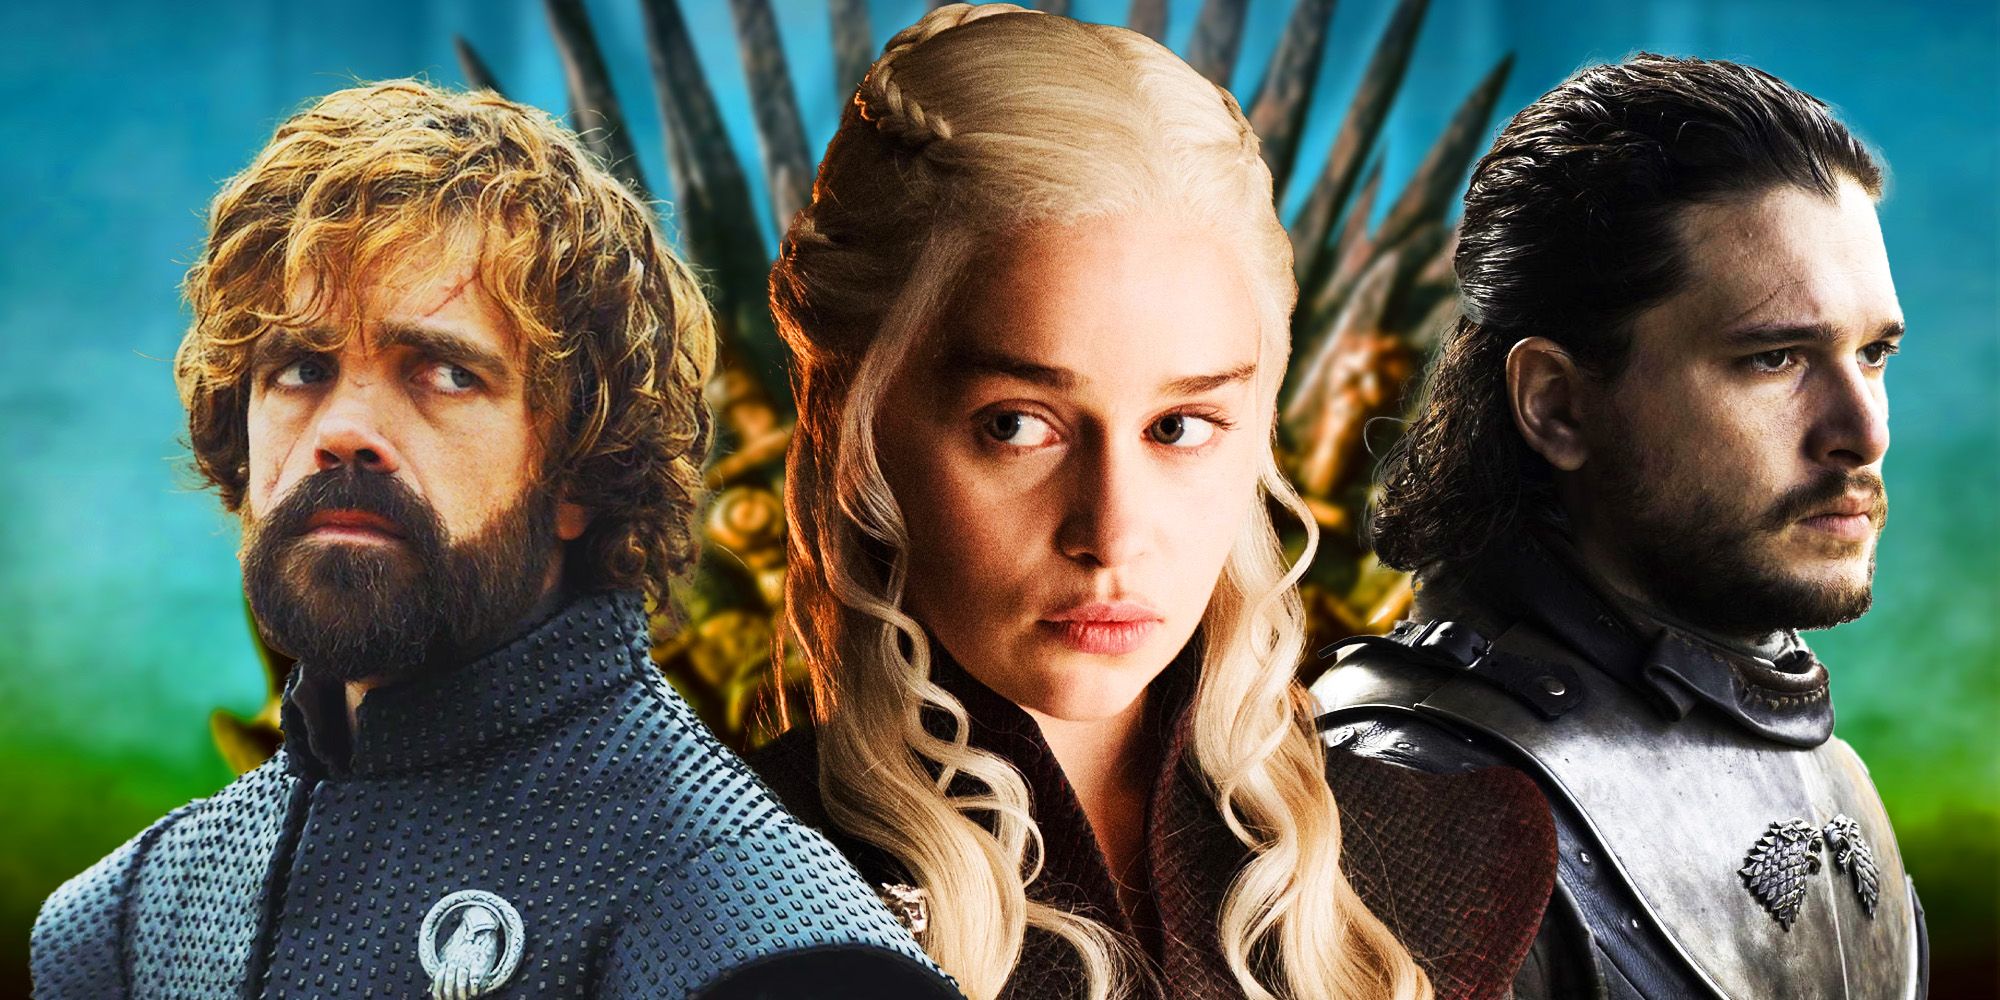 Game Of Thrones Showrunners Reveal One Thing They’d Change (& It’s Not The Final Season)